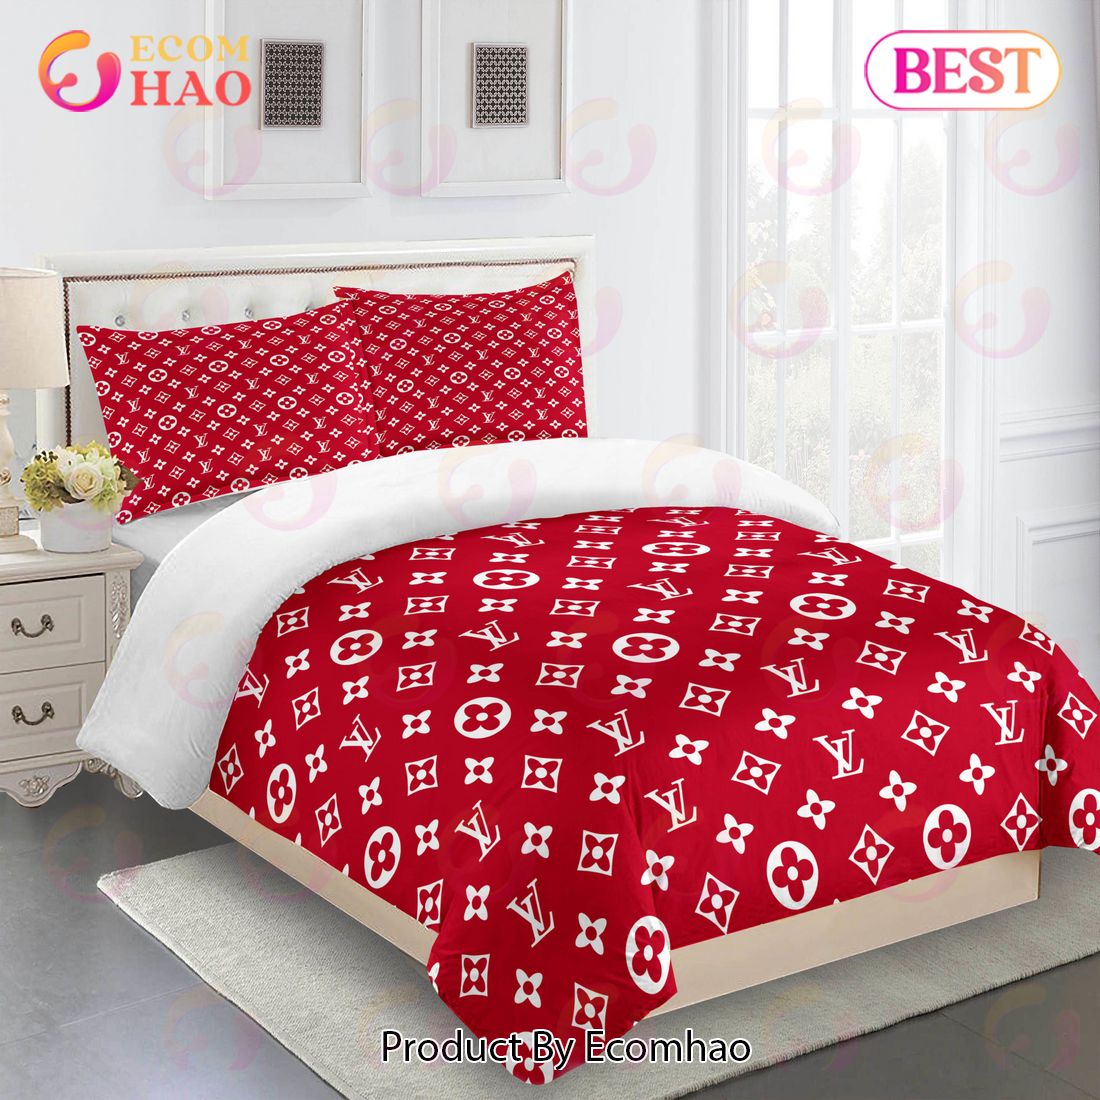 Red & white louis bedset